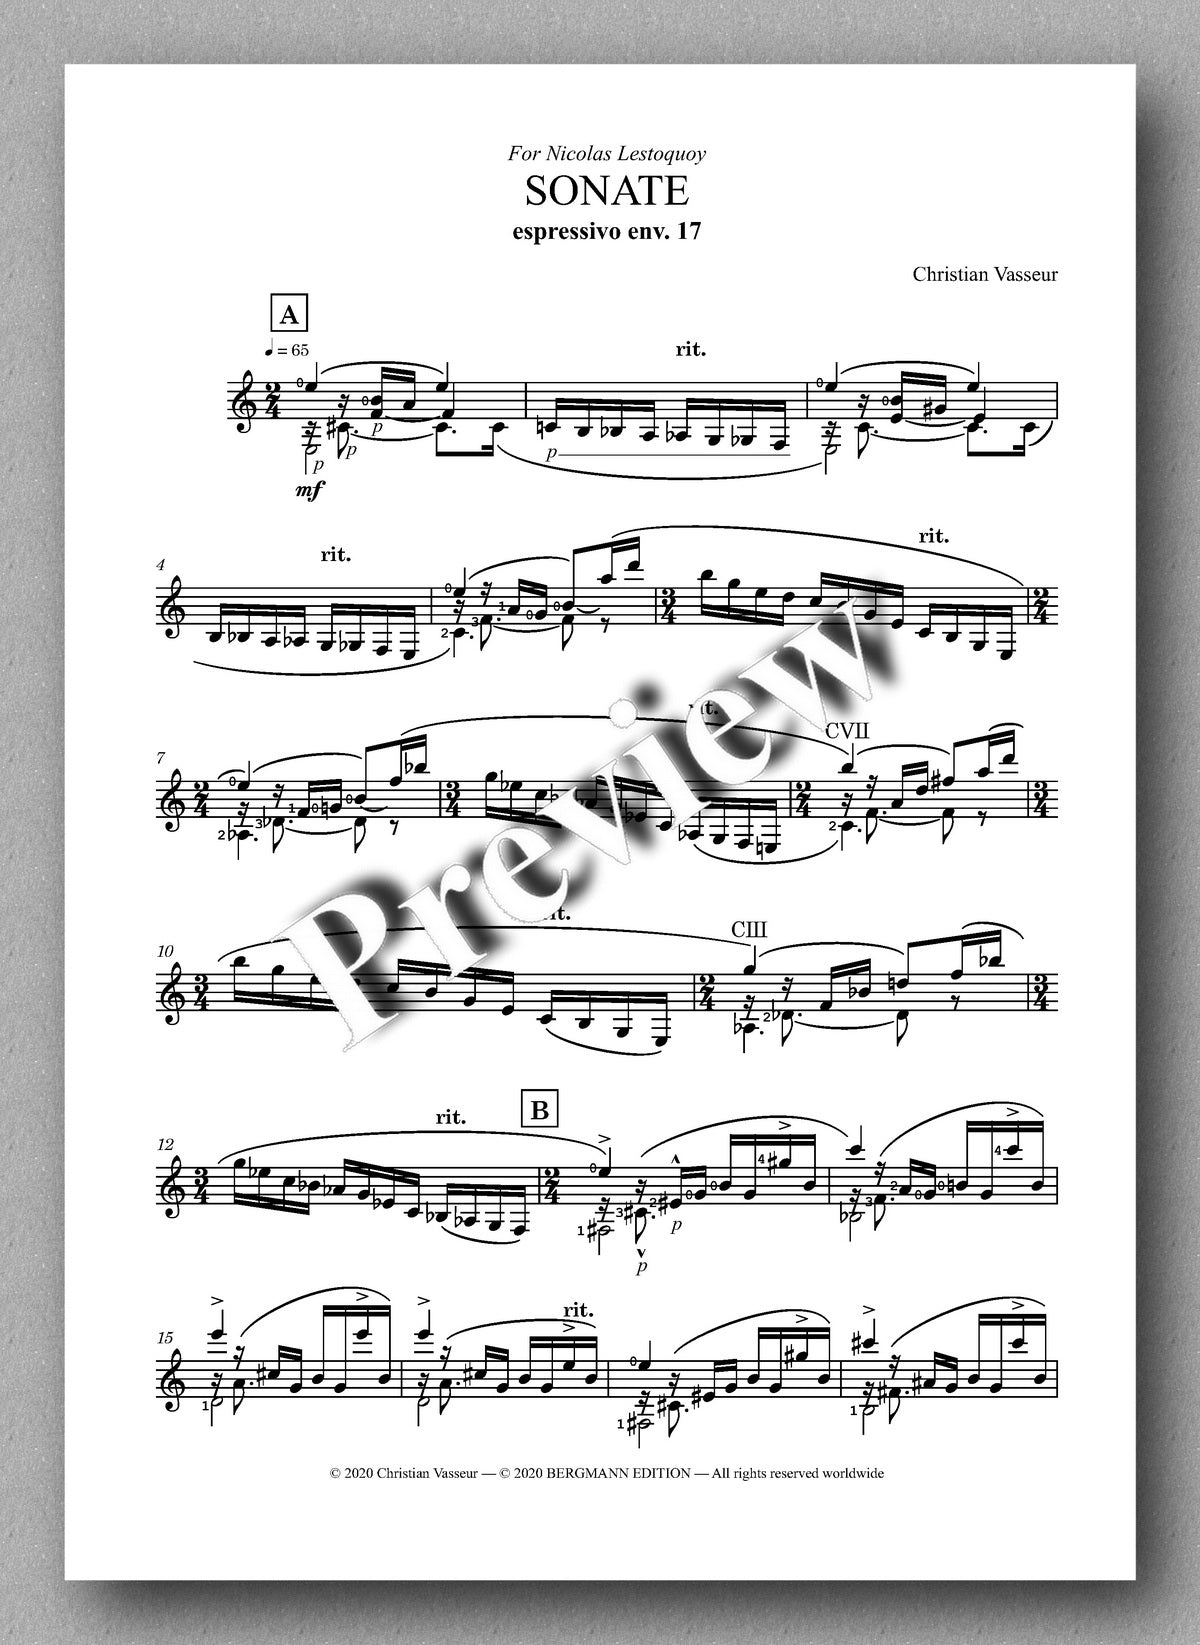 Sonate by Christian Vasseur - preview of the the music score 1